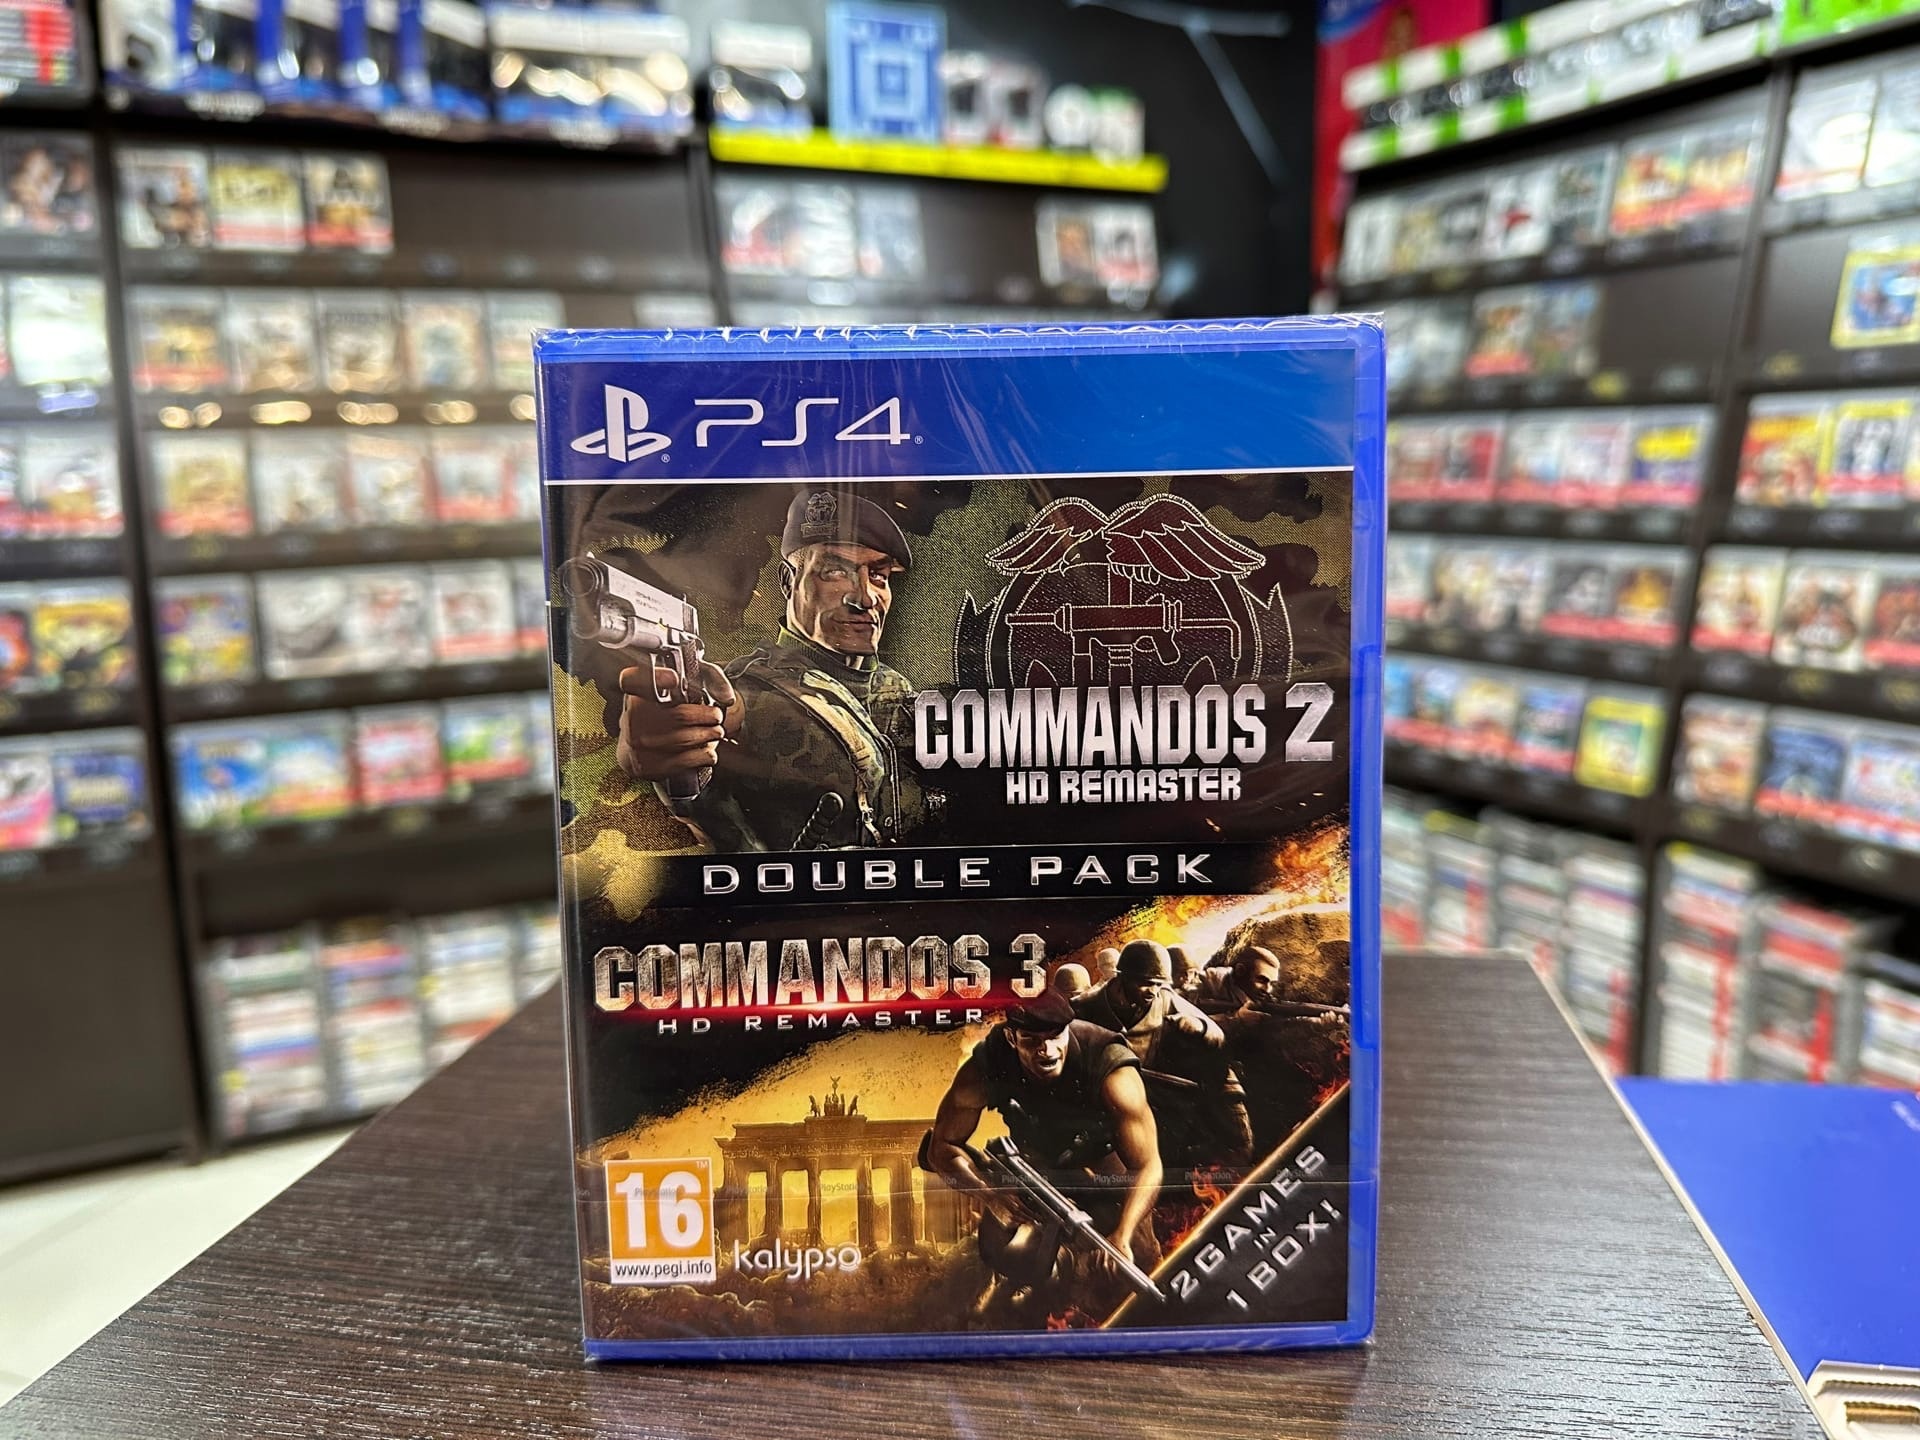 Commandos 2 HD and Commandos 3 HD Remaster Double Pack PS4